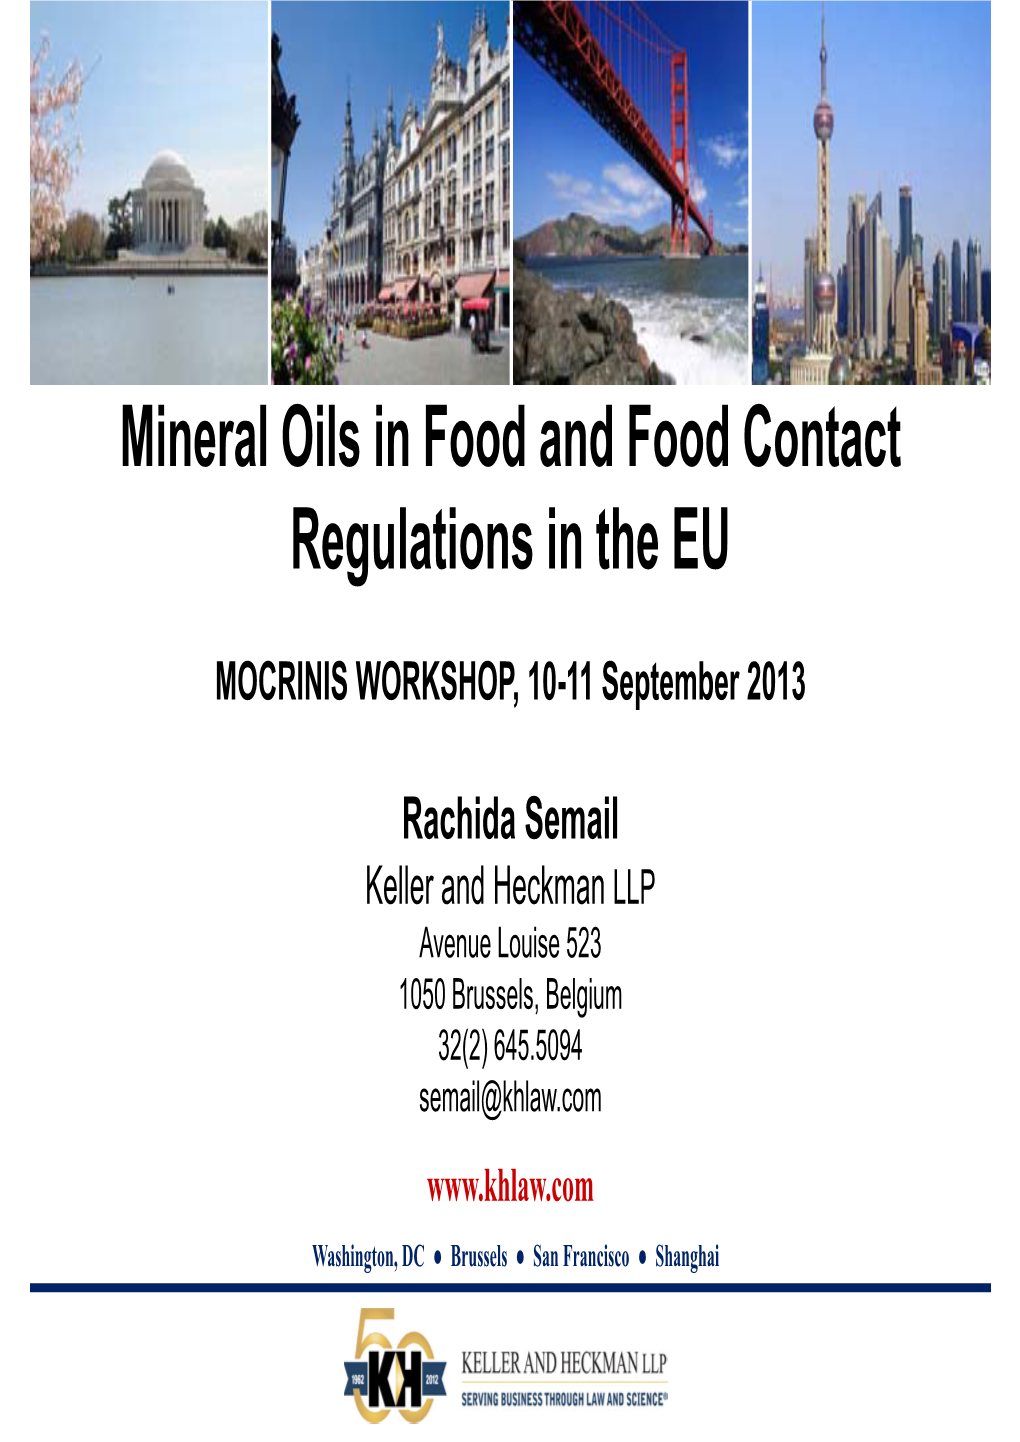 Mineral Oils in Food and Food Contact Regulations in the EU